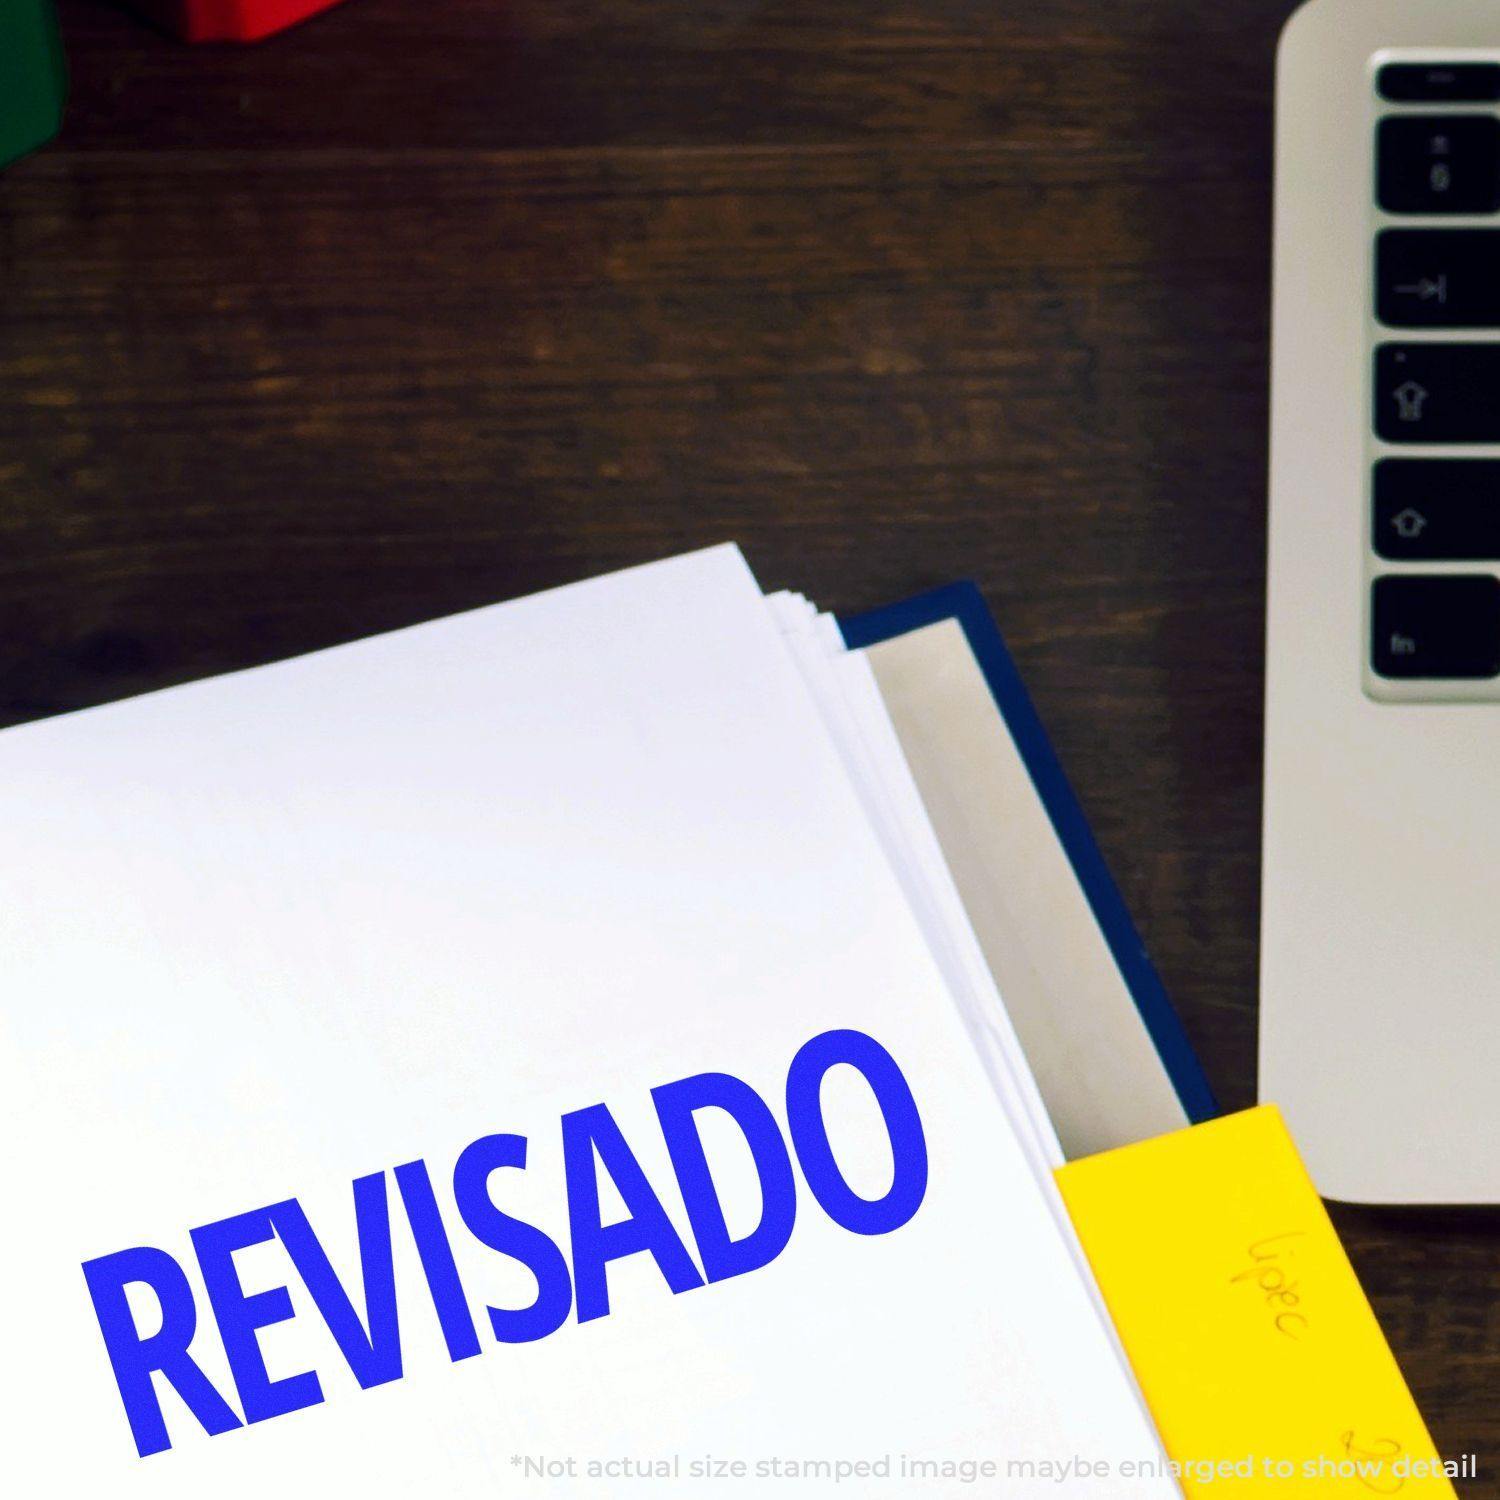 A stock office rubber stamp with a stamped image showing how the text "REVISADO" is displayed after stamping.